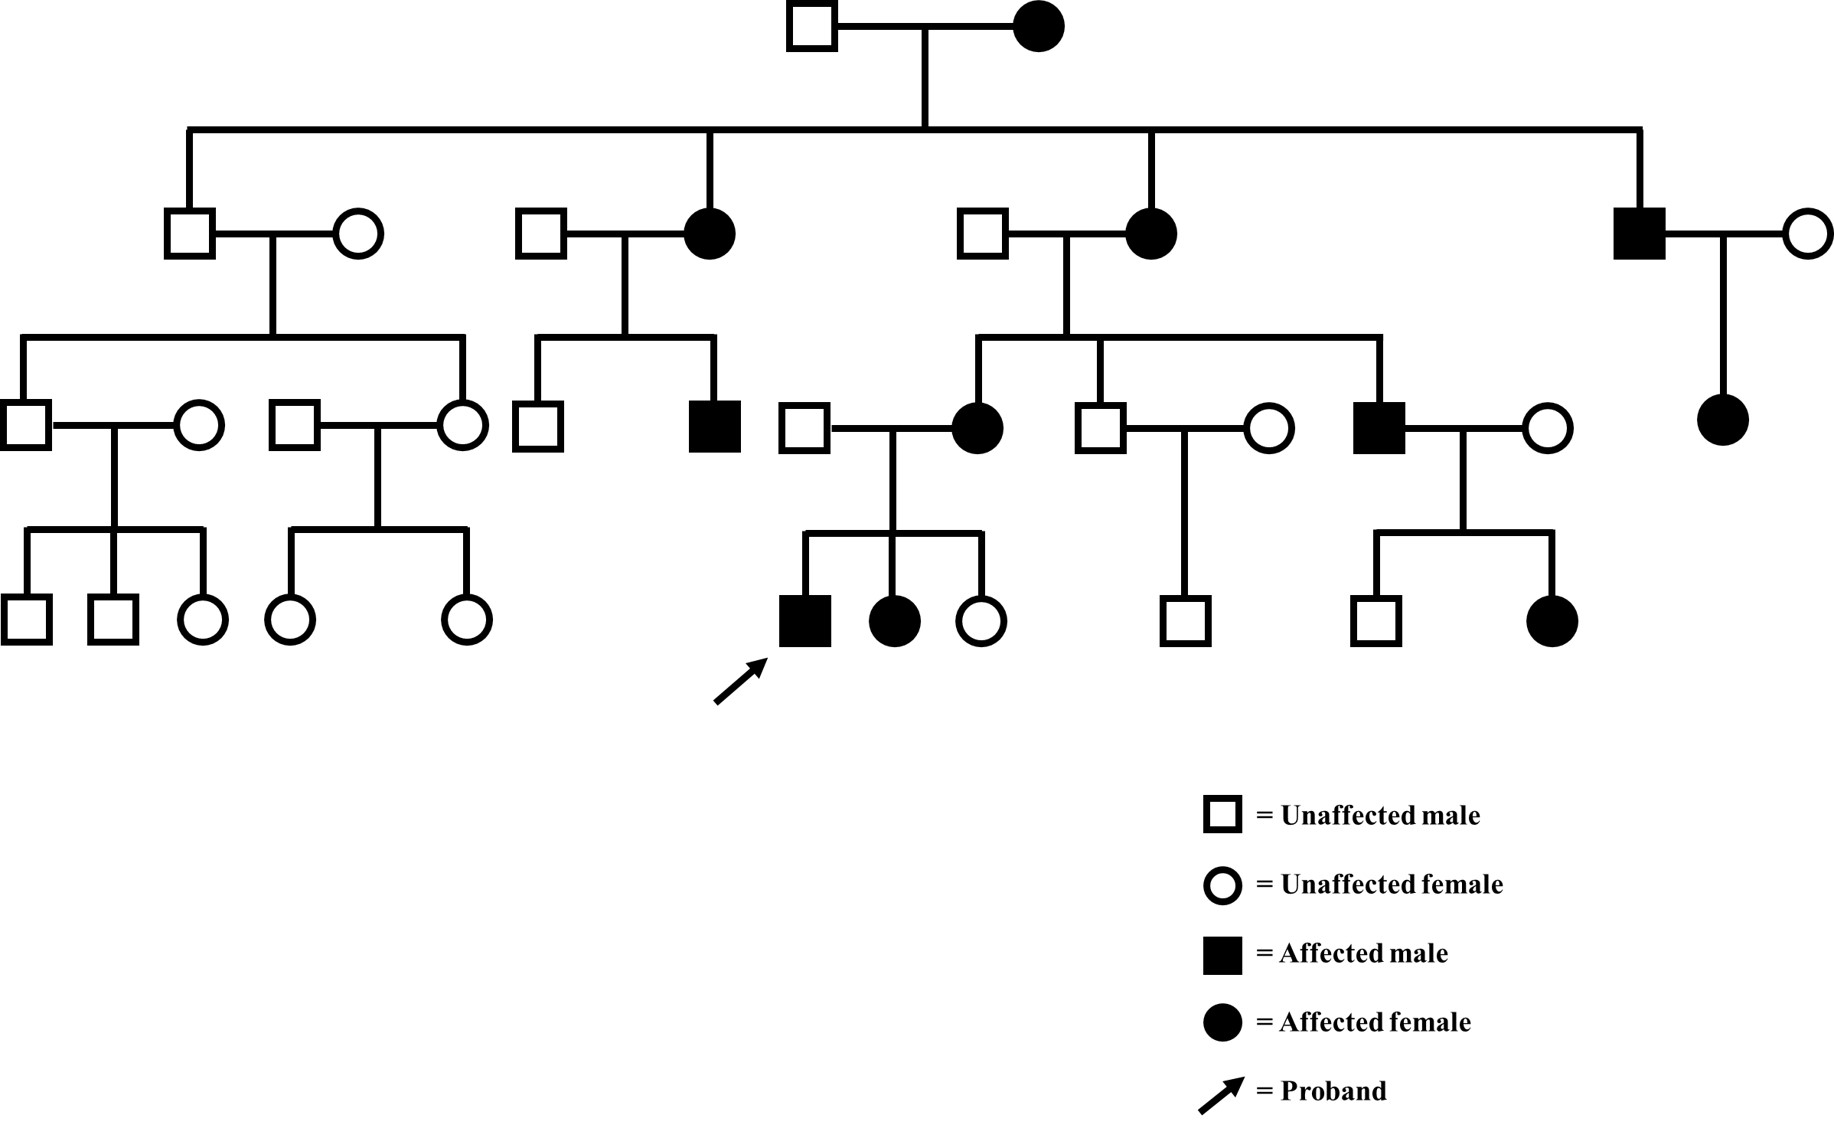 A 28-year-old gentleman presented with inability to walk fast. Examination revealed pes cavus, hammer toes, wasting of all extremities distally and generalised areflexia. He reported that several of his family members had foot deformities and were ‘slow’. His pedigree chart is provided. What is the pattern of inheritance?